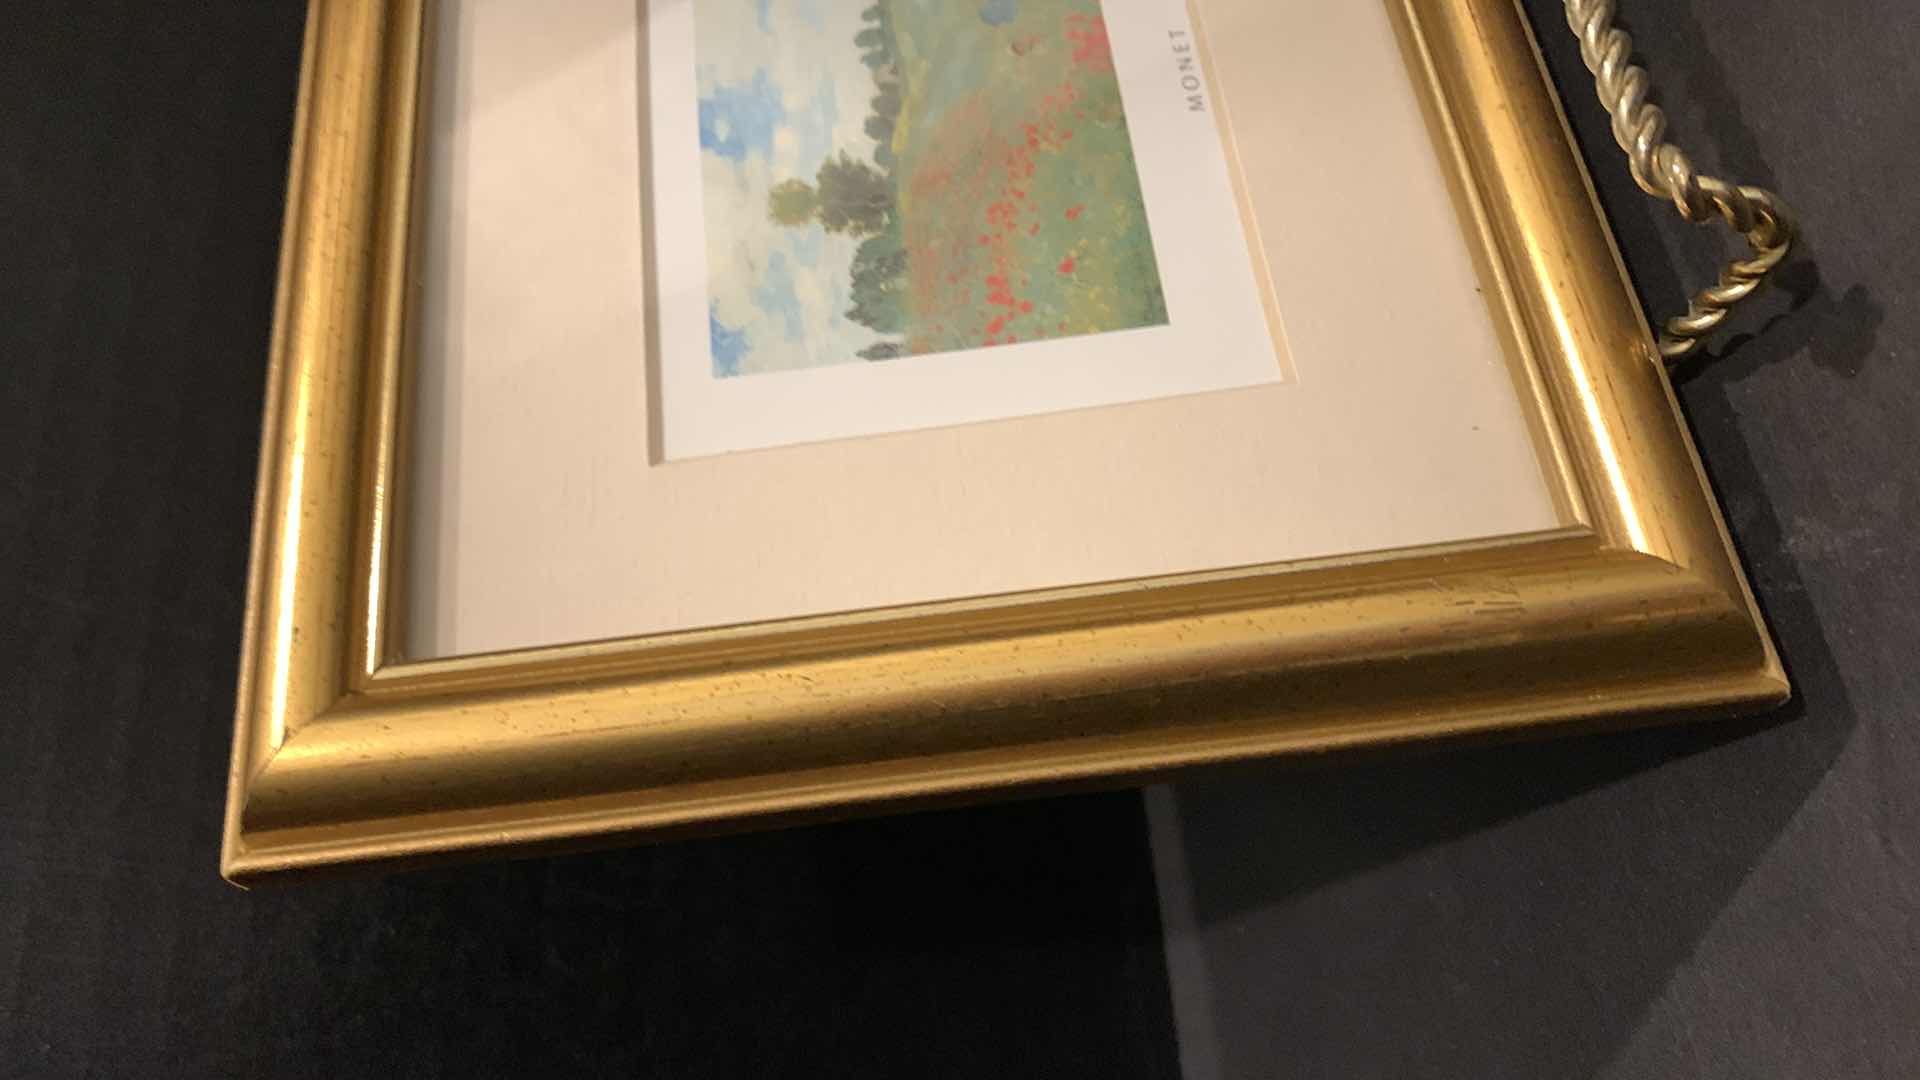 Photo 4 of ARTWORK, MONET IN GOLD FRAME, 7.5” x 6.5”, 2 PIECES